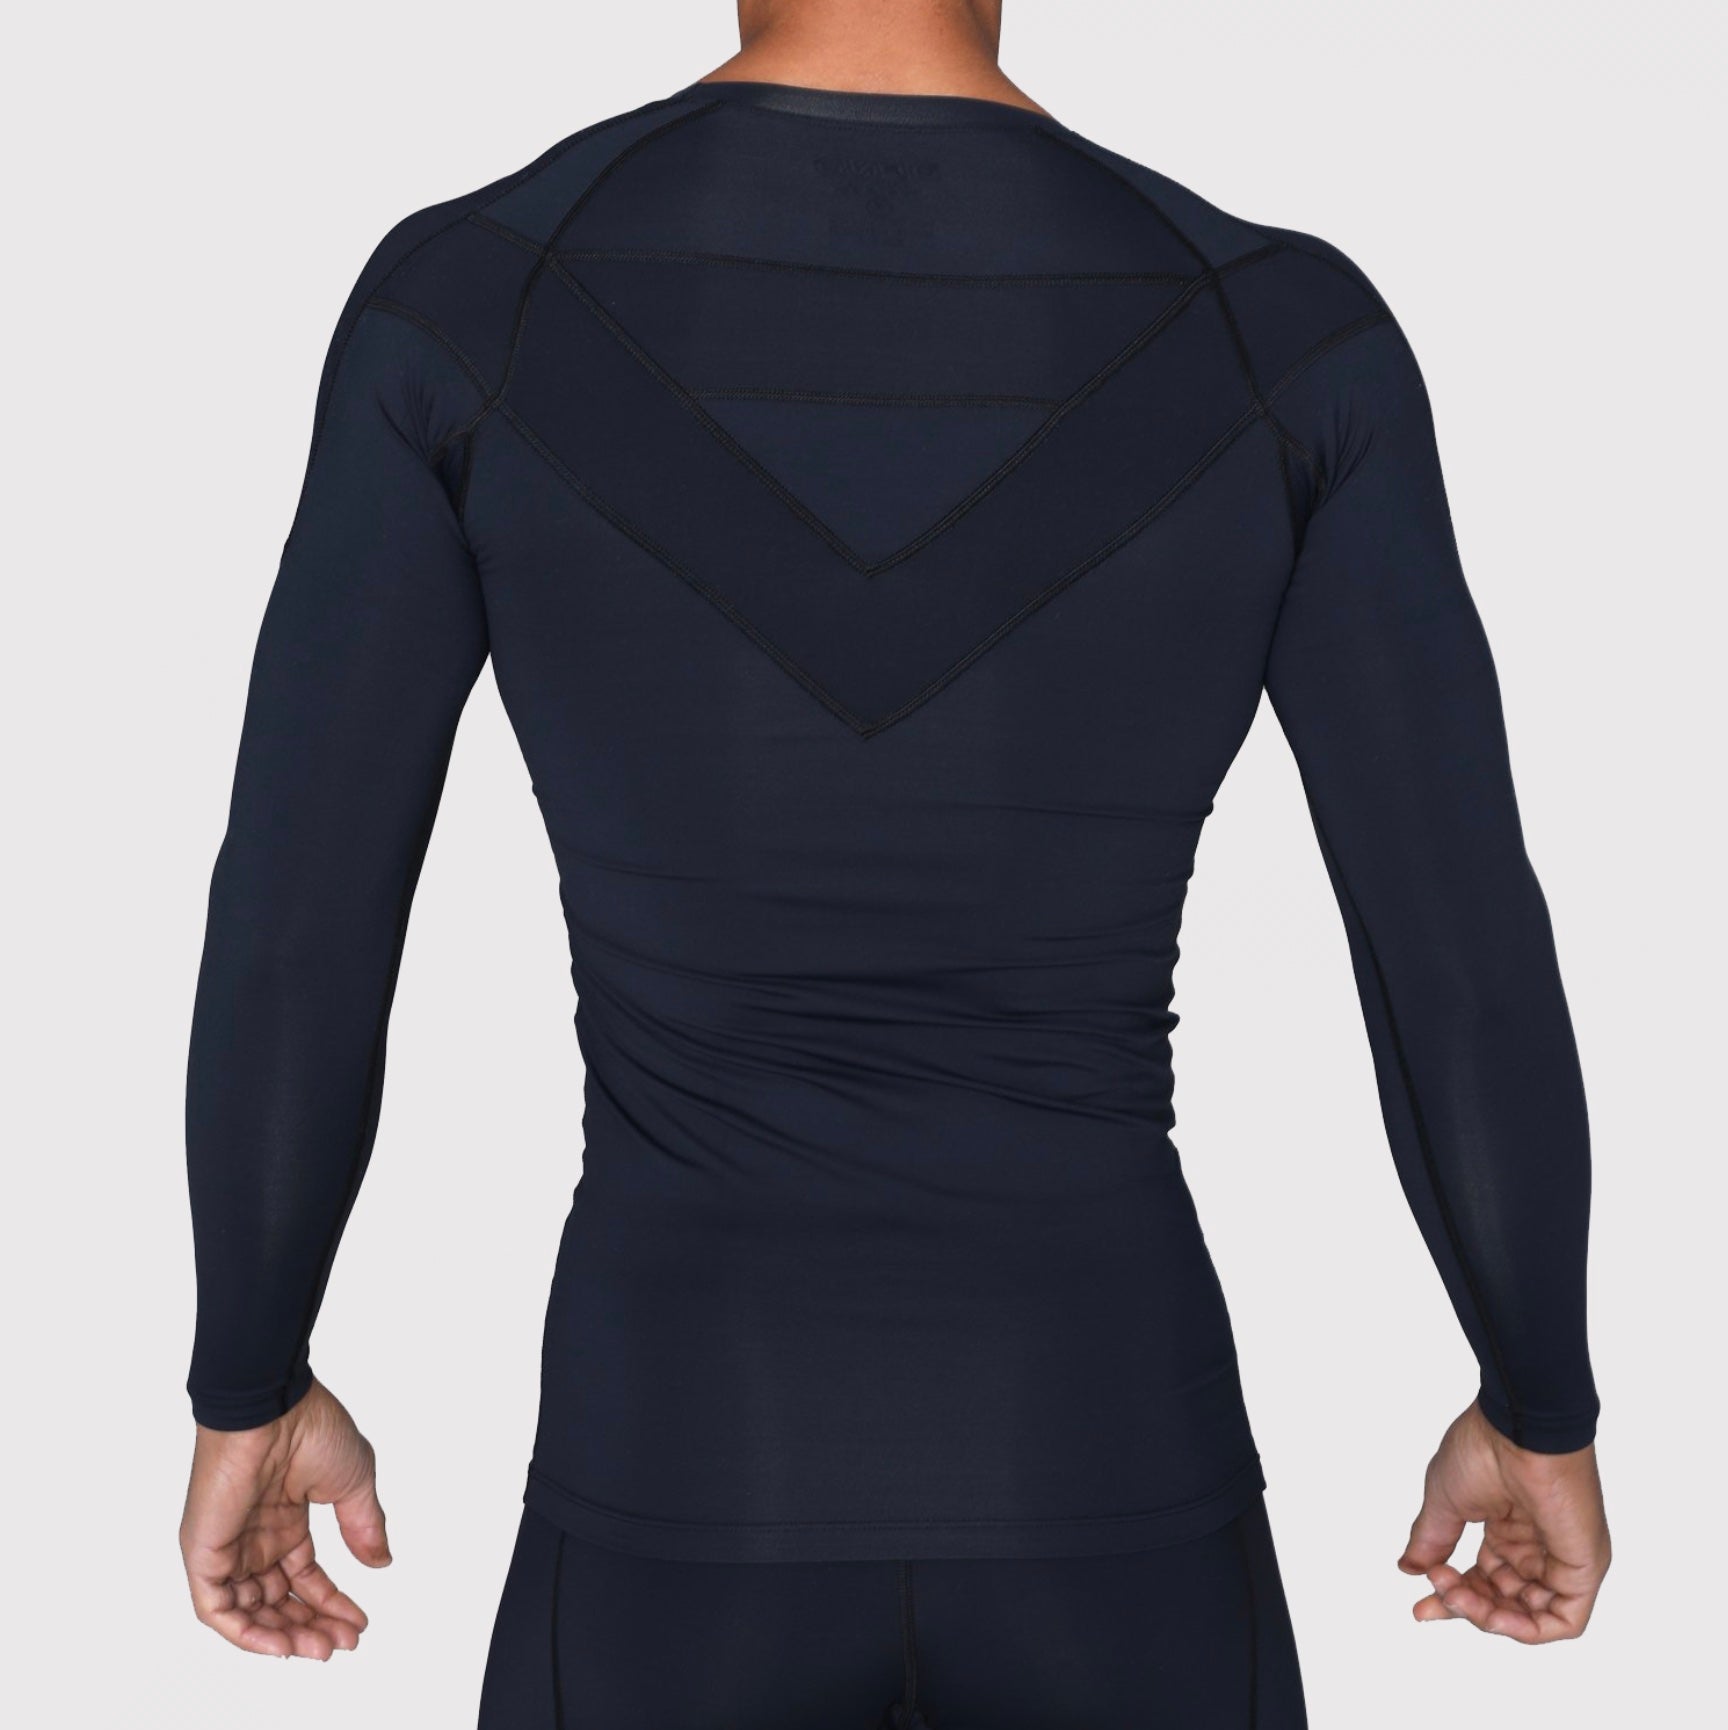 Long Sleeve Compression Shirt for Men and Women – DFND